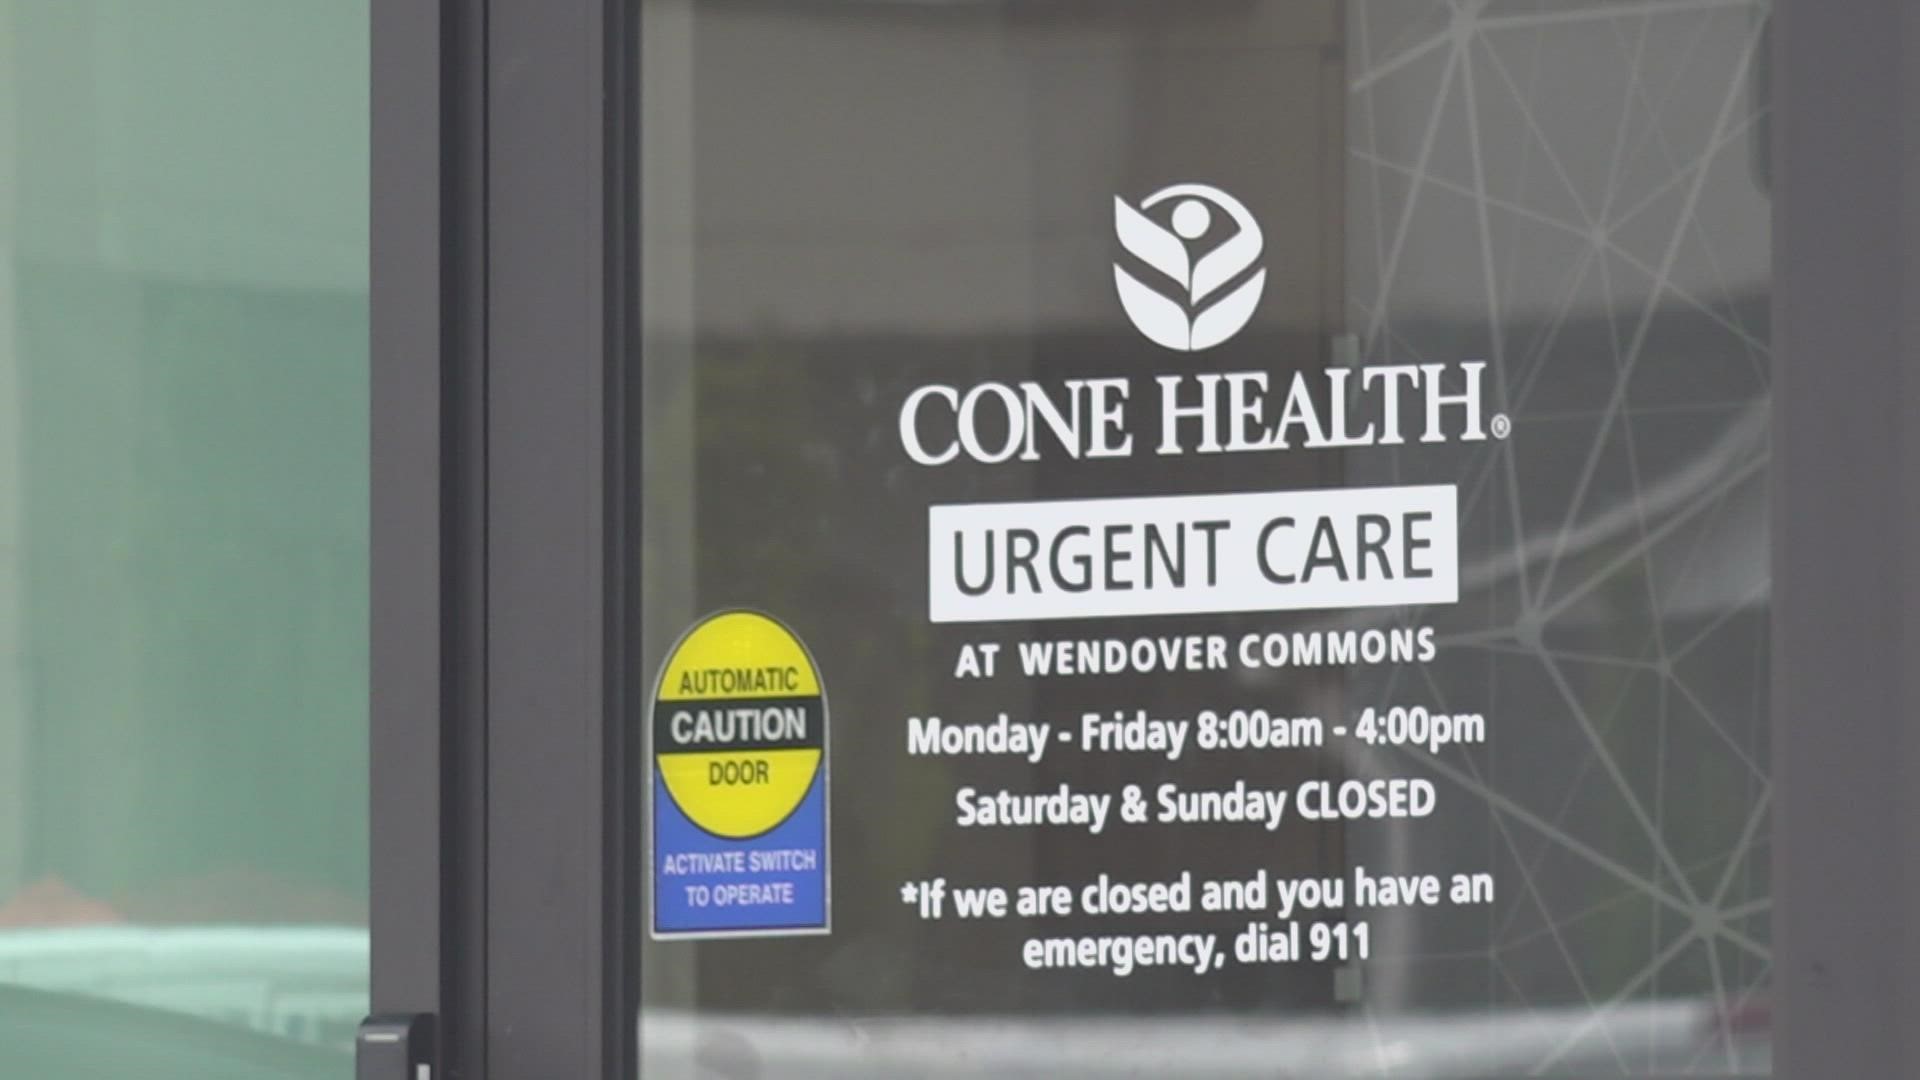 With wait times getting longer in the emergency room one local hospital is opening a new urgent care facility.